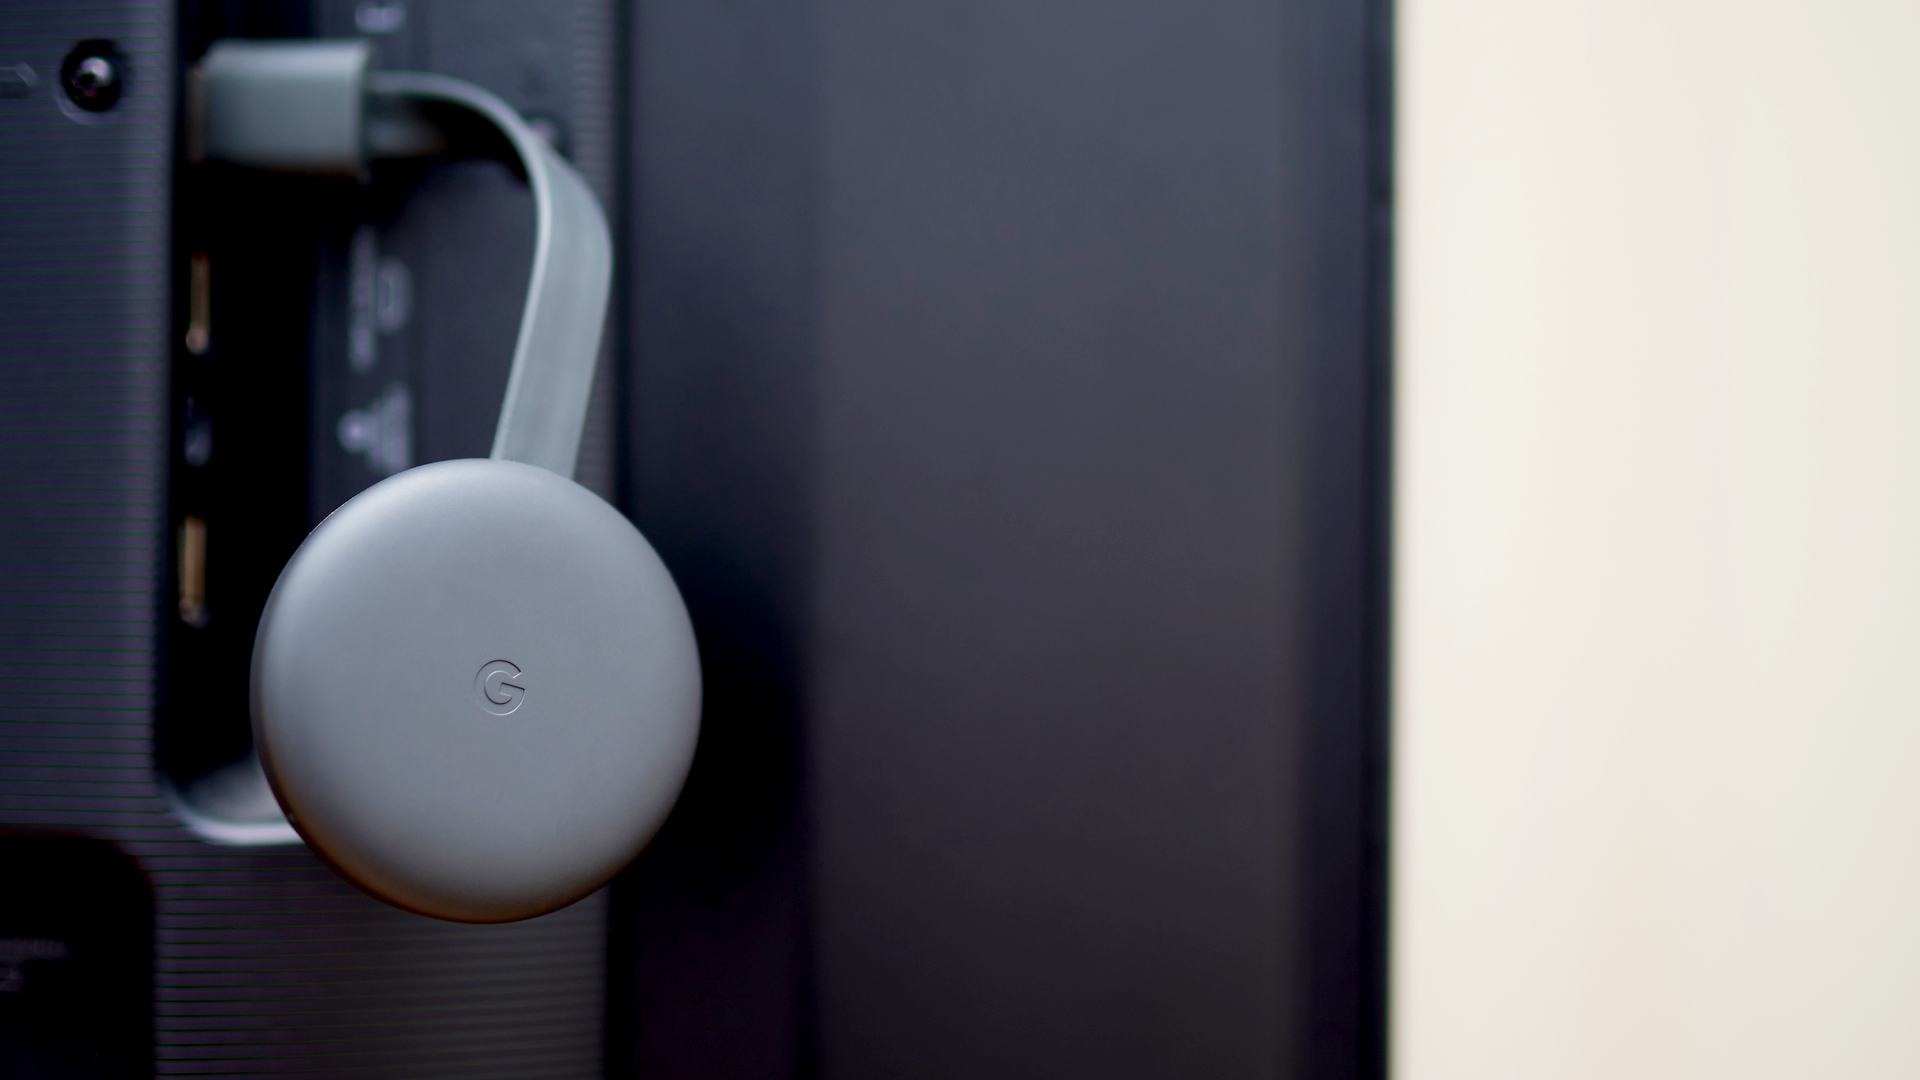 Google removes Chromecast Guest mode that didn't need Wi-Fi